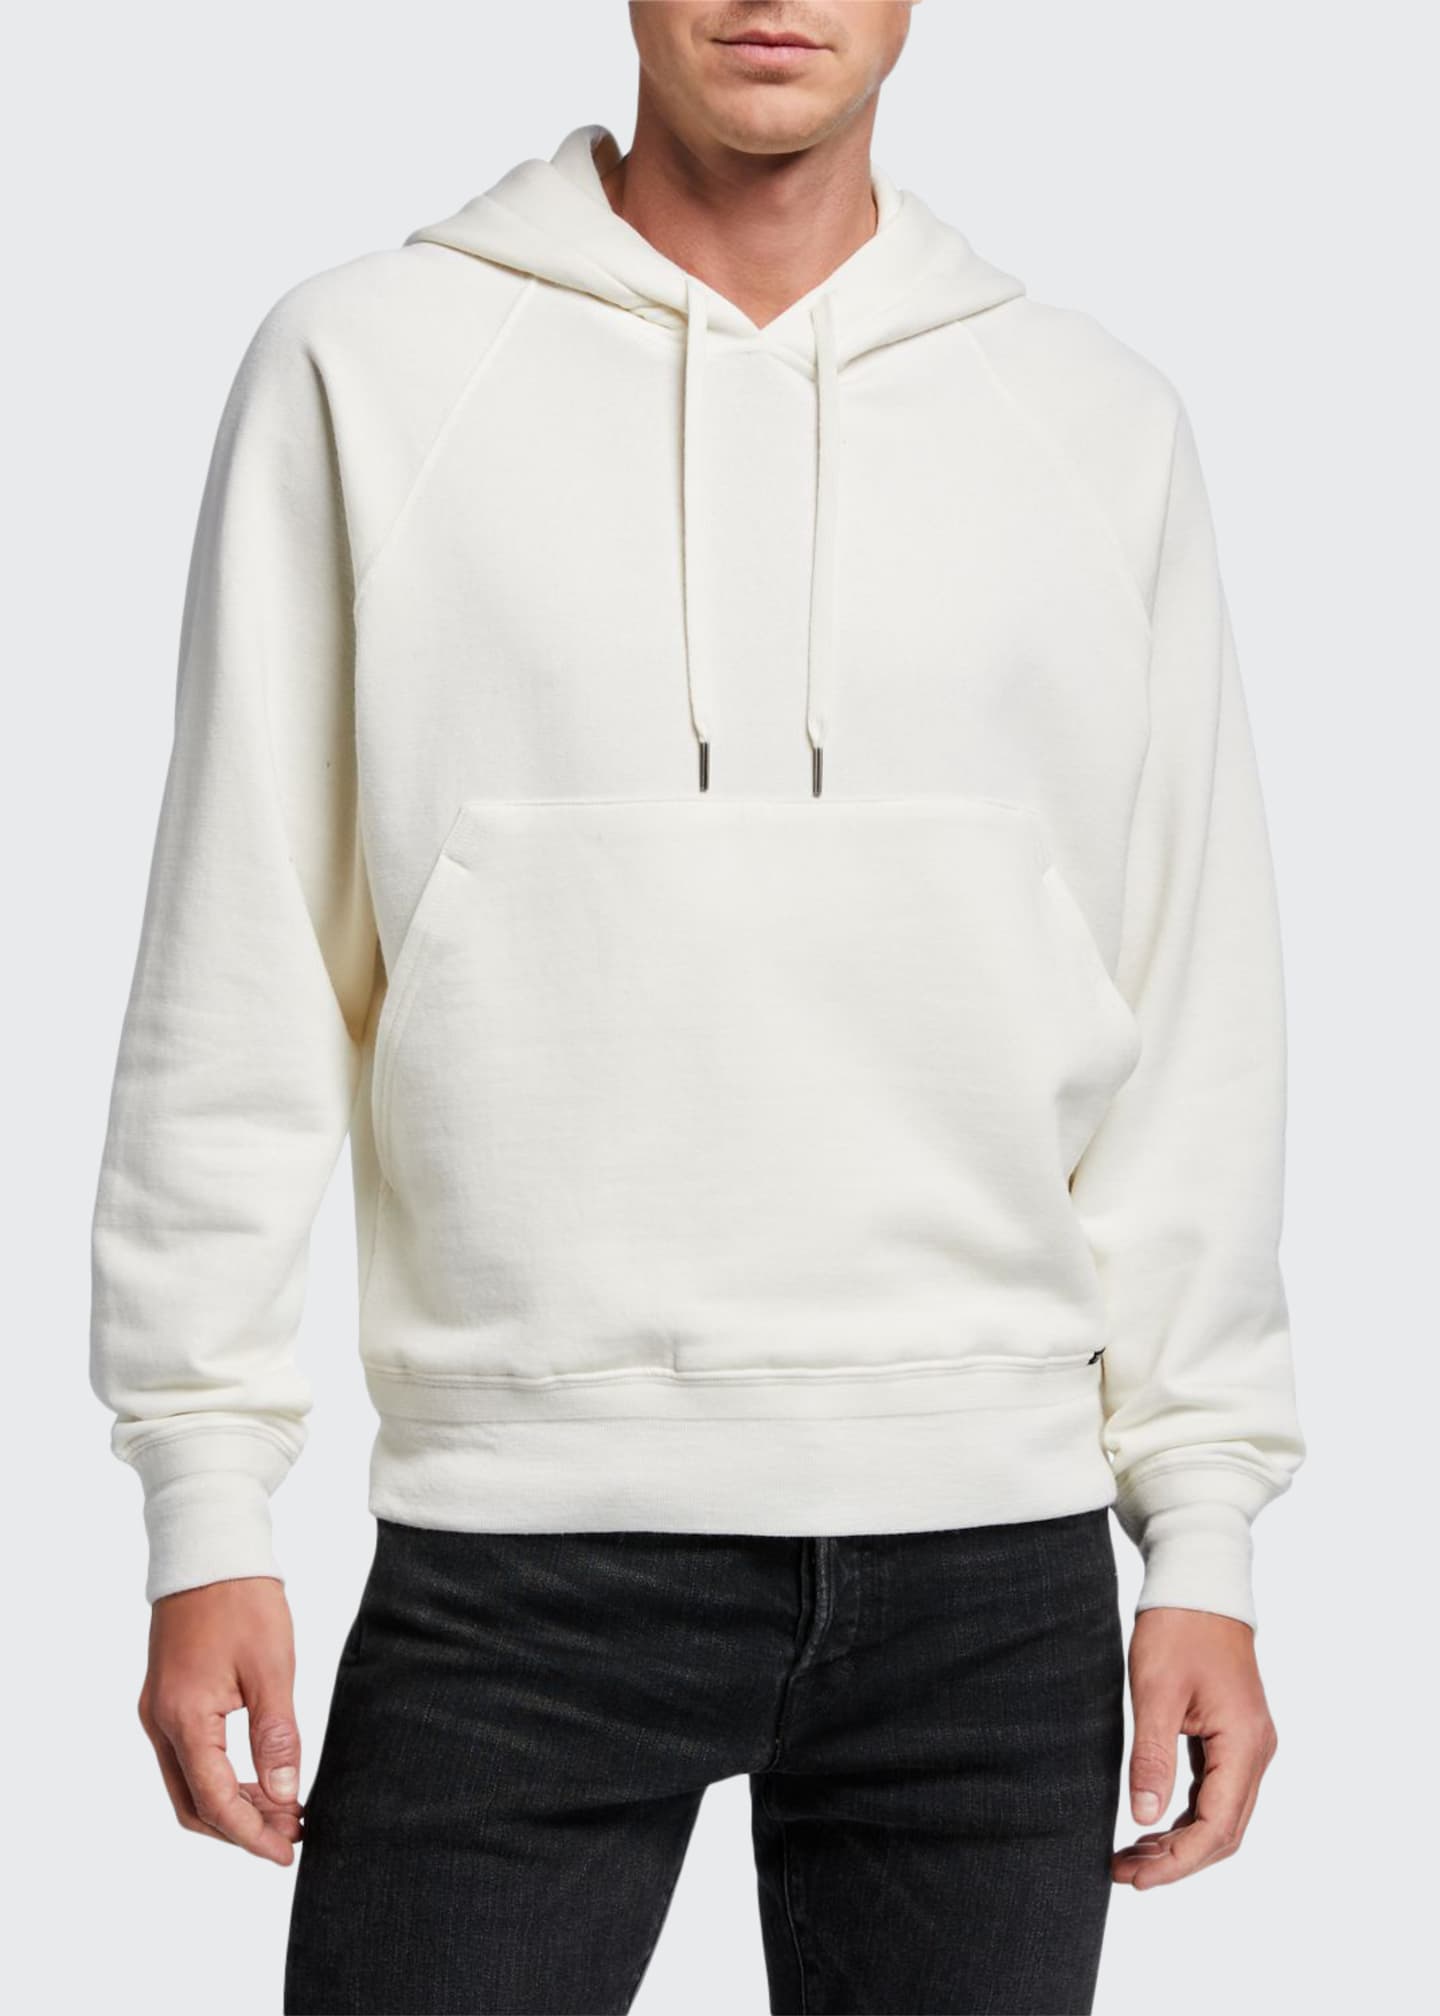 solid pullover hoodie